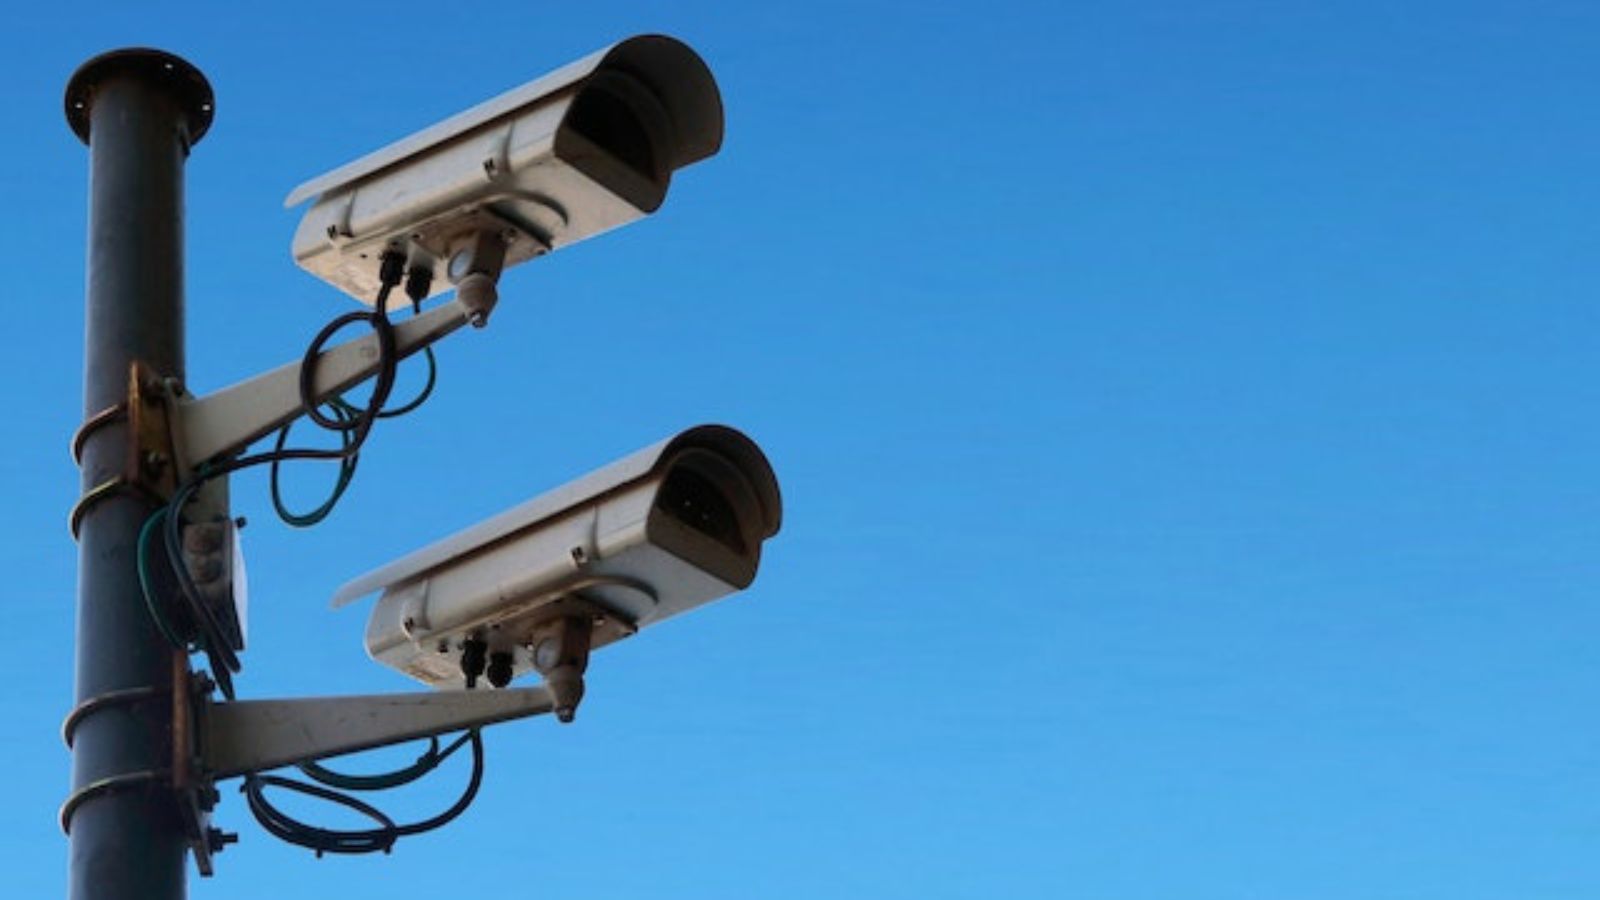 A CCTV system in a place of business